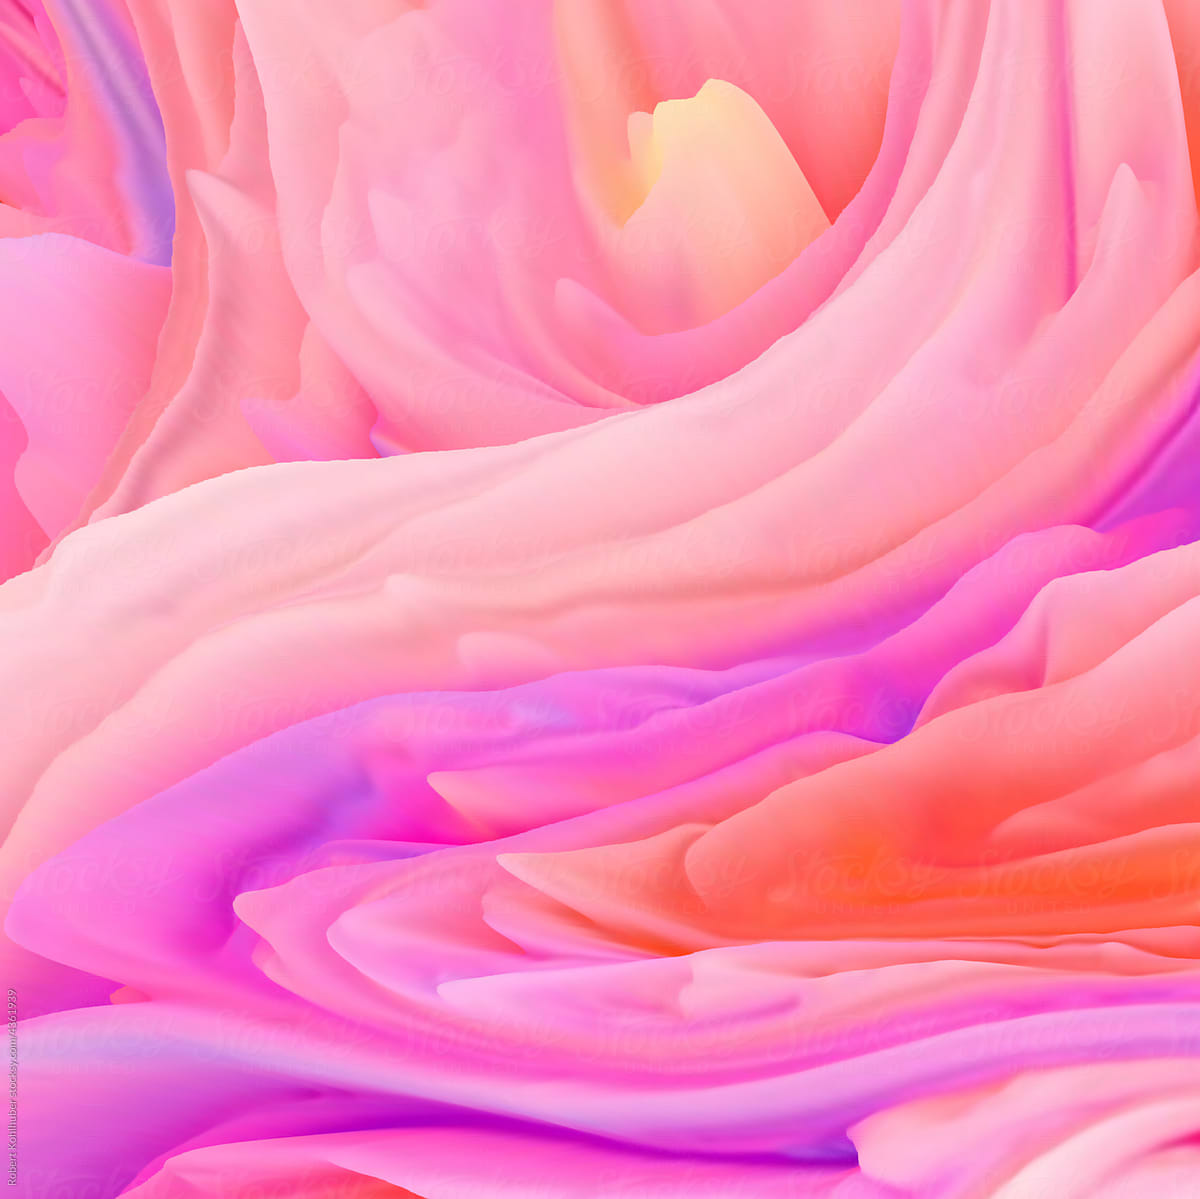 3D extruded pastel fluid shapes